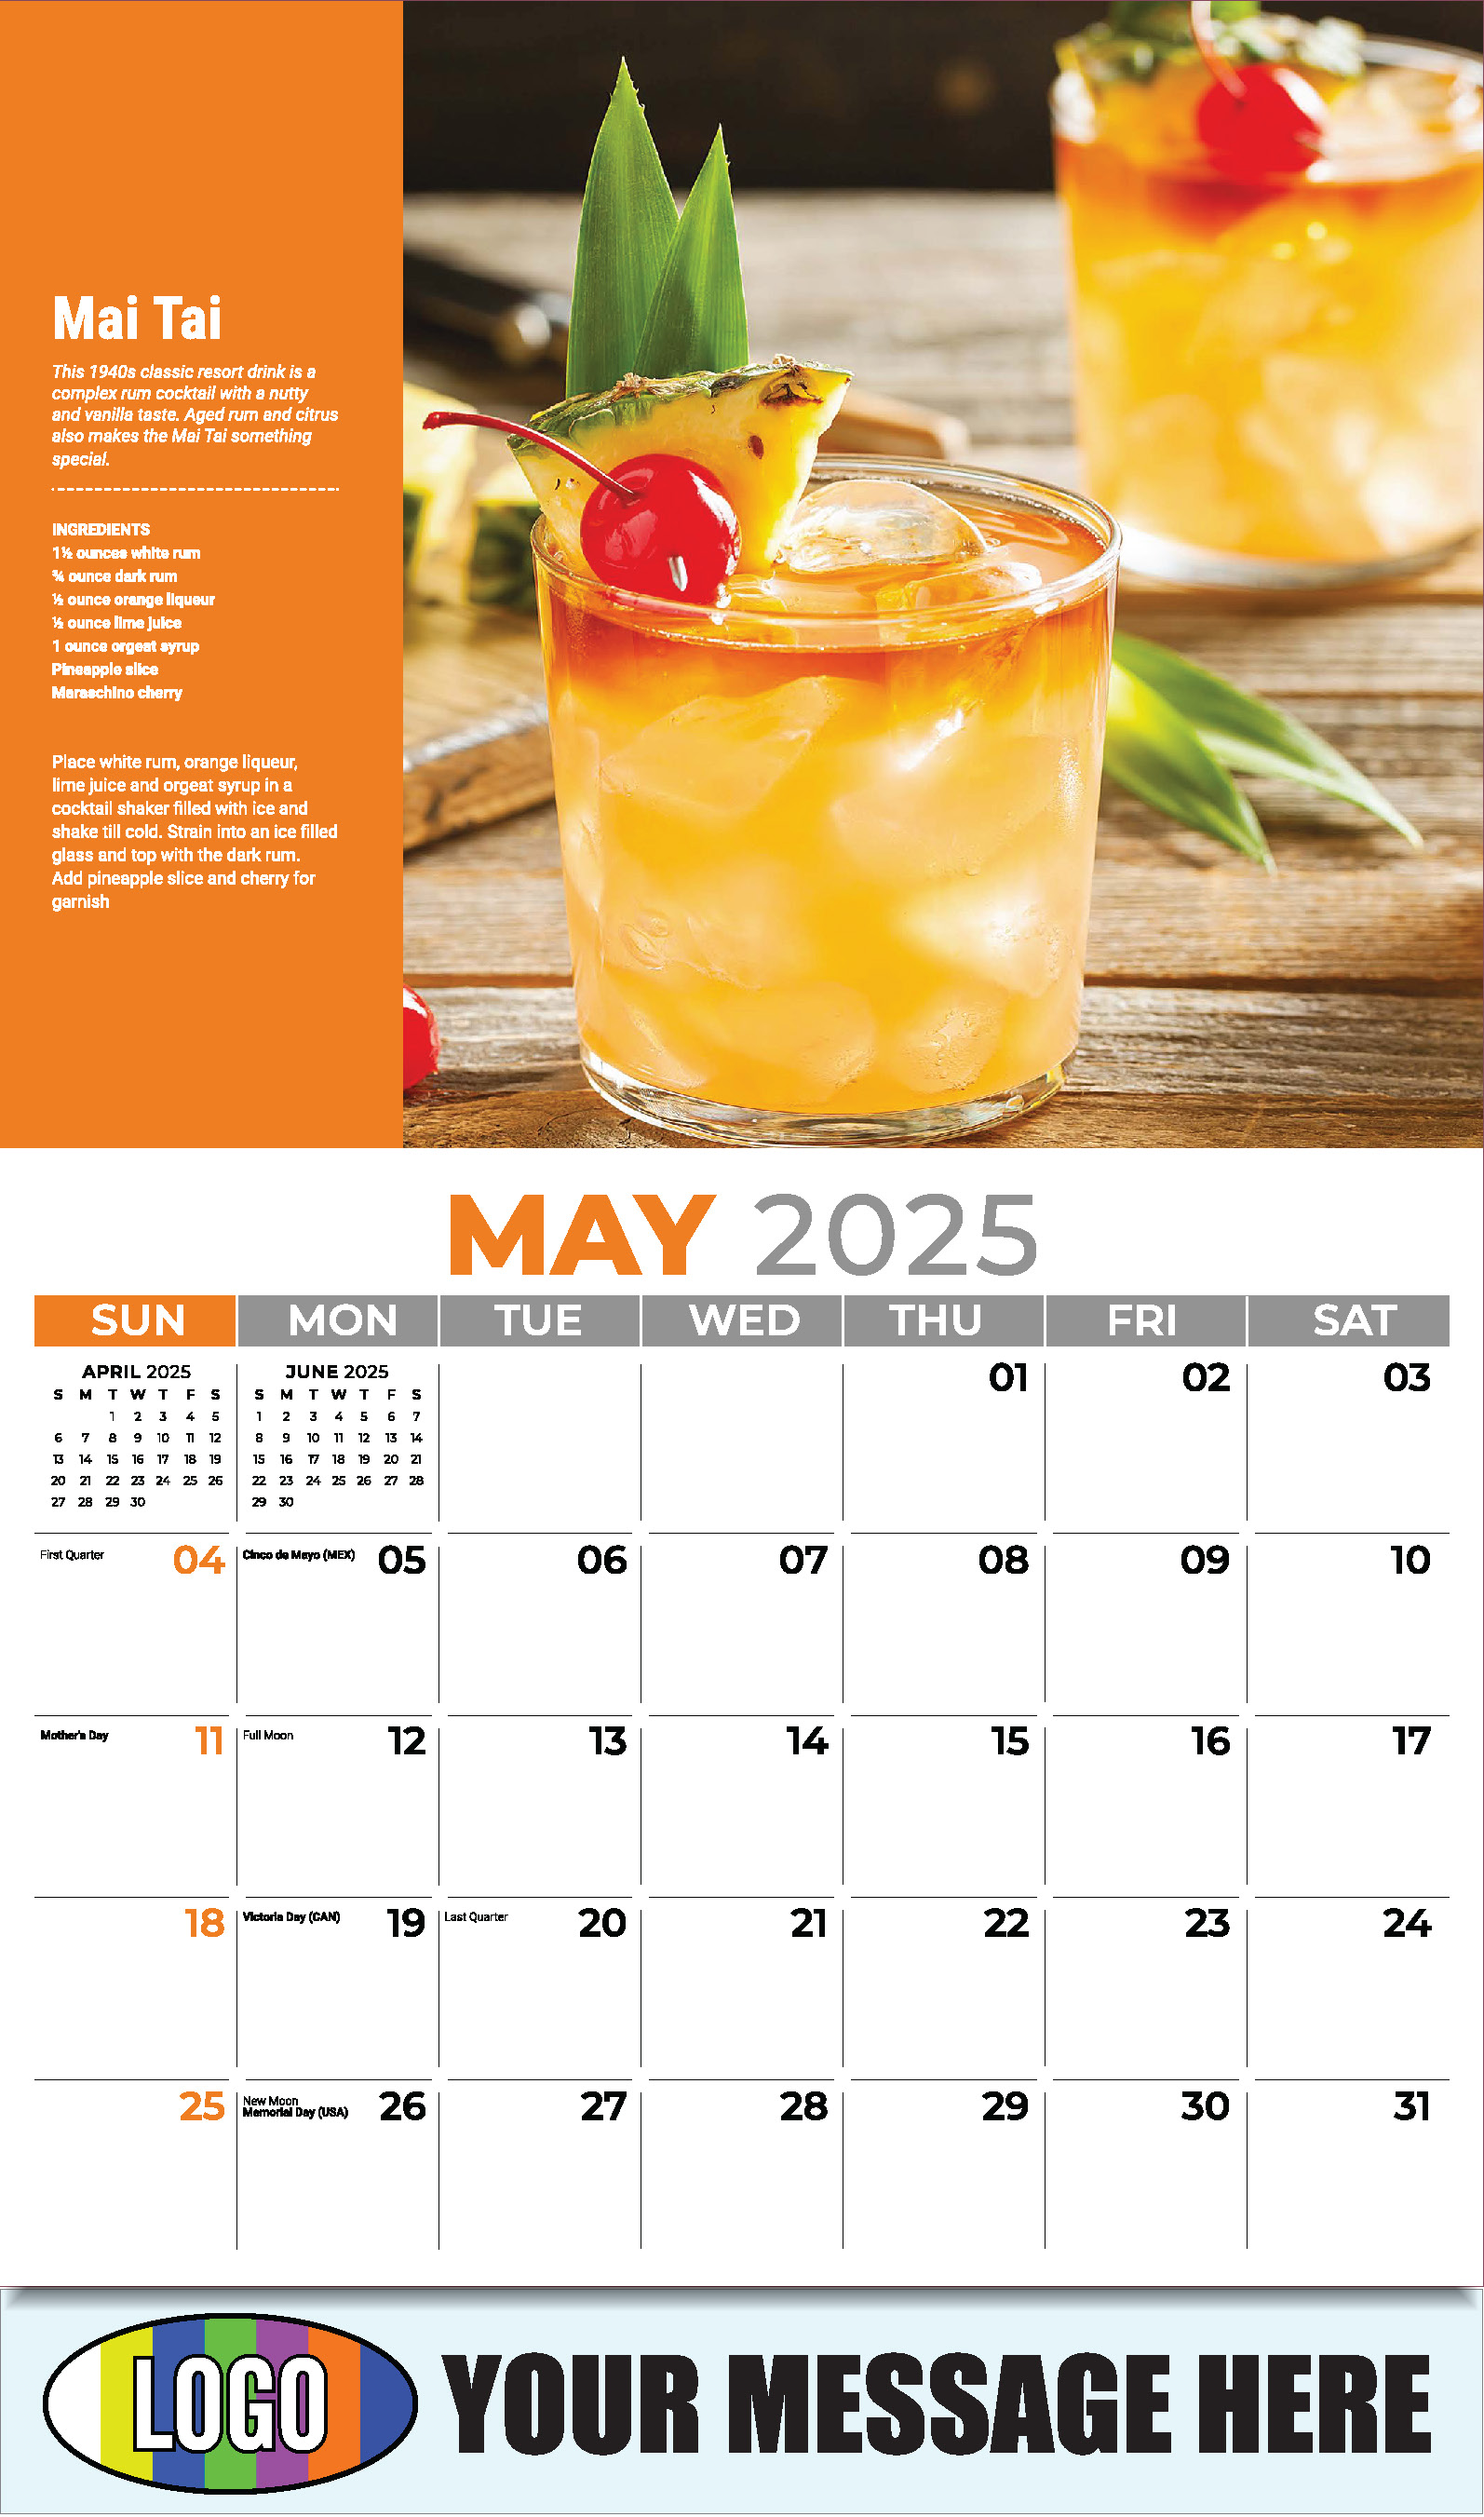 Happy Hour Cocktails 2025 Business Promotional Calendar - May